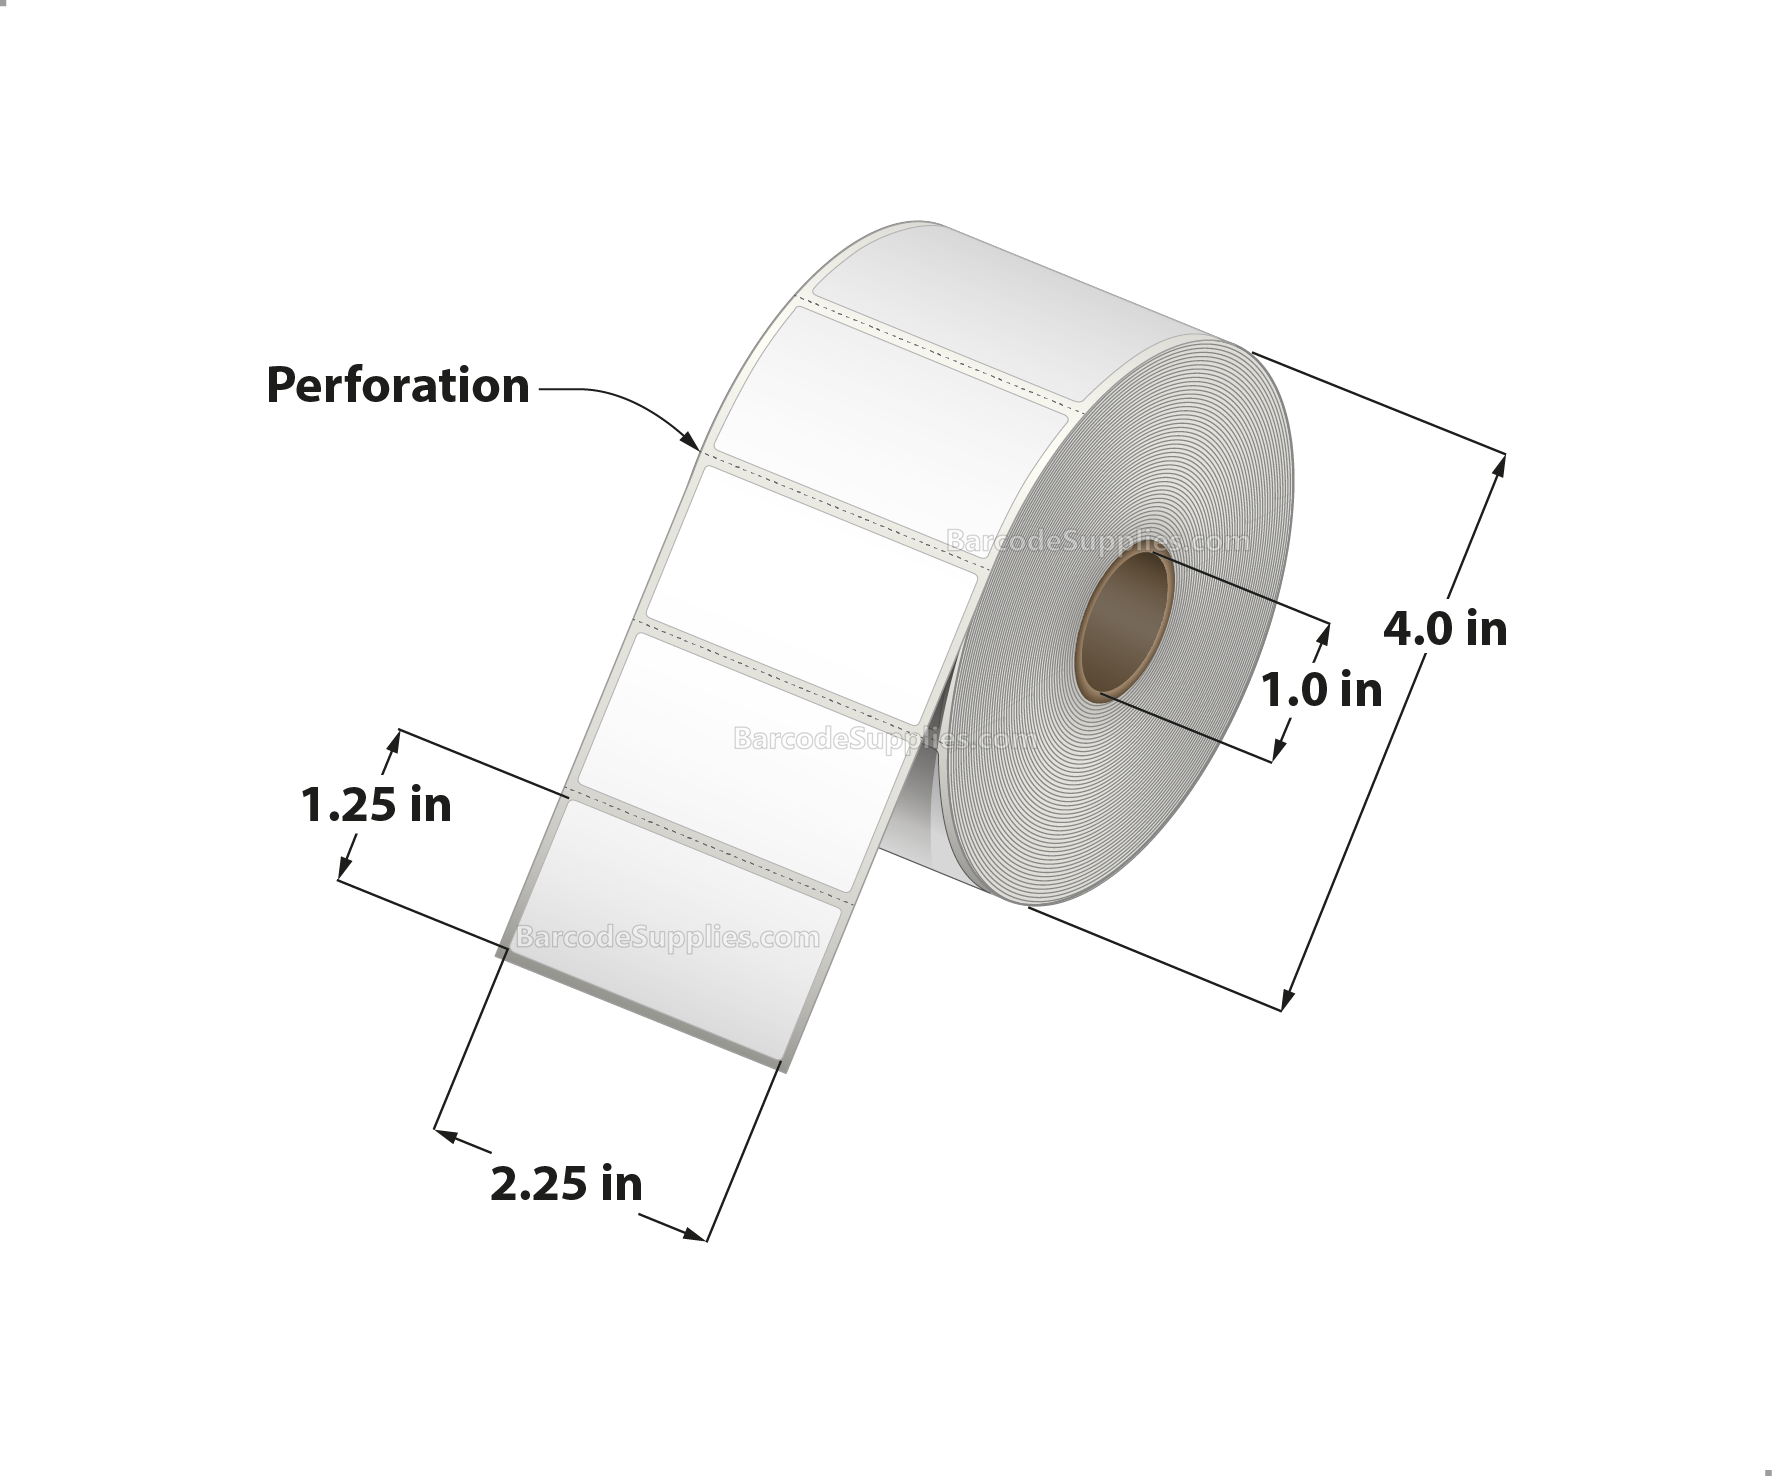 2.25 x 1.25 Thermal Transfer White Labels With Rubber Adhesive - Perforated - 1135 Labels Per Roll - Carton Of 12 Rolls - 13620 Labels Total - MPN: RTT4-225125-1P